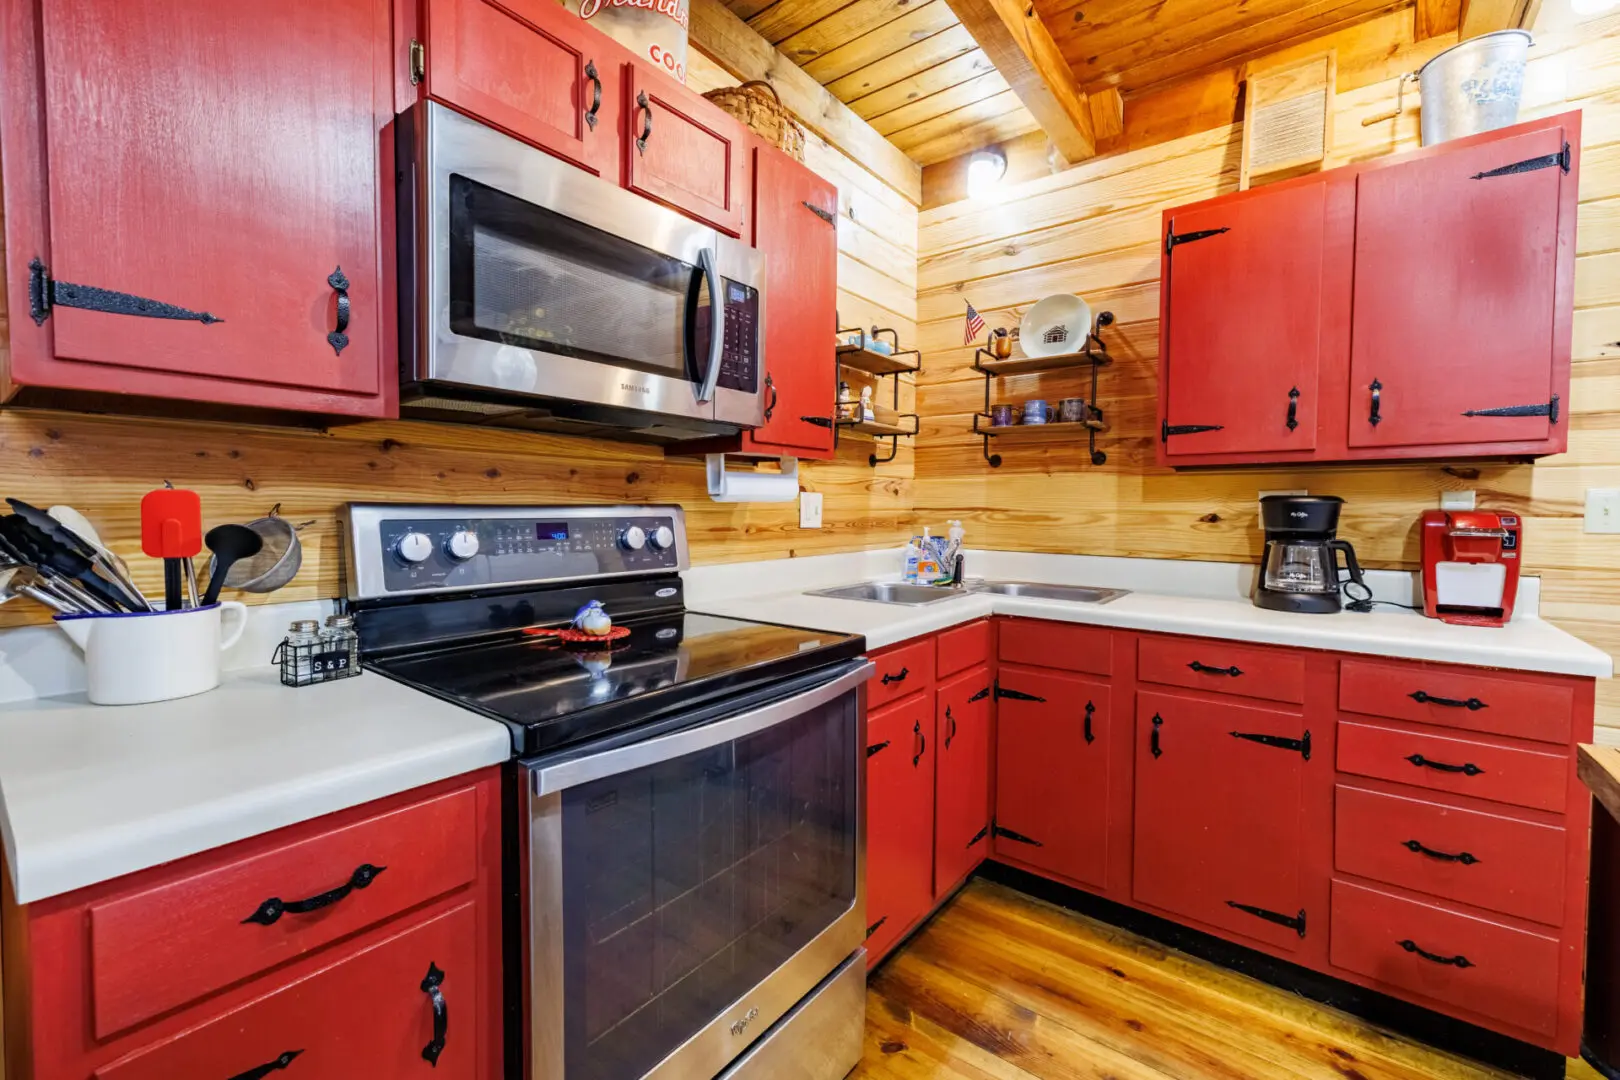 A vacation kitchen with red cabinets and stainless steel appliances.